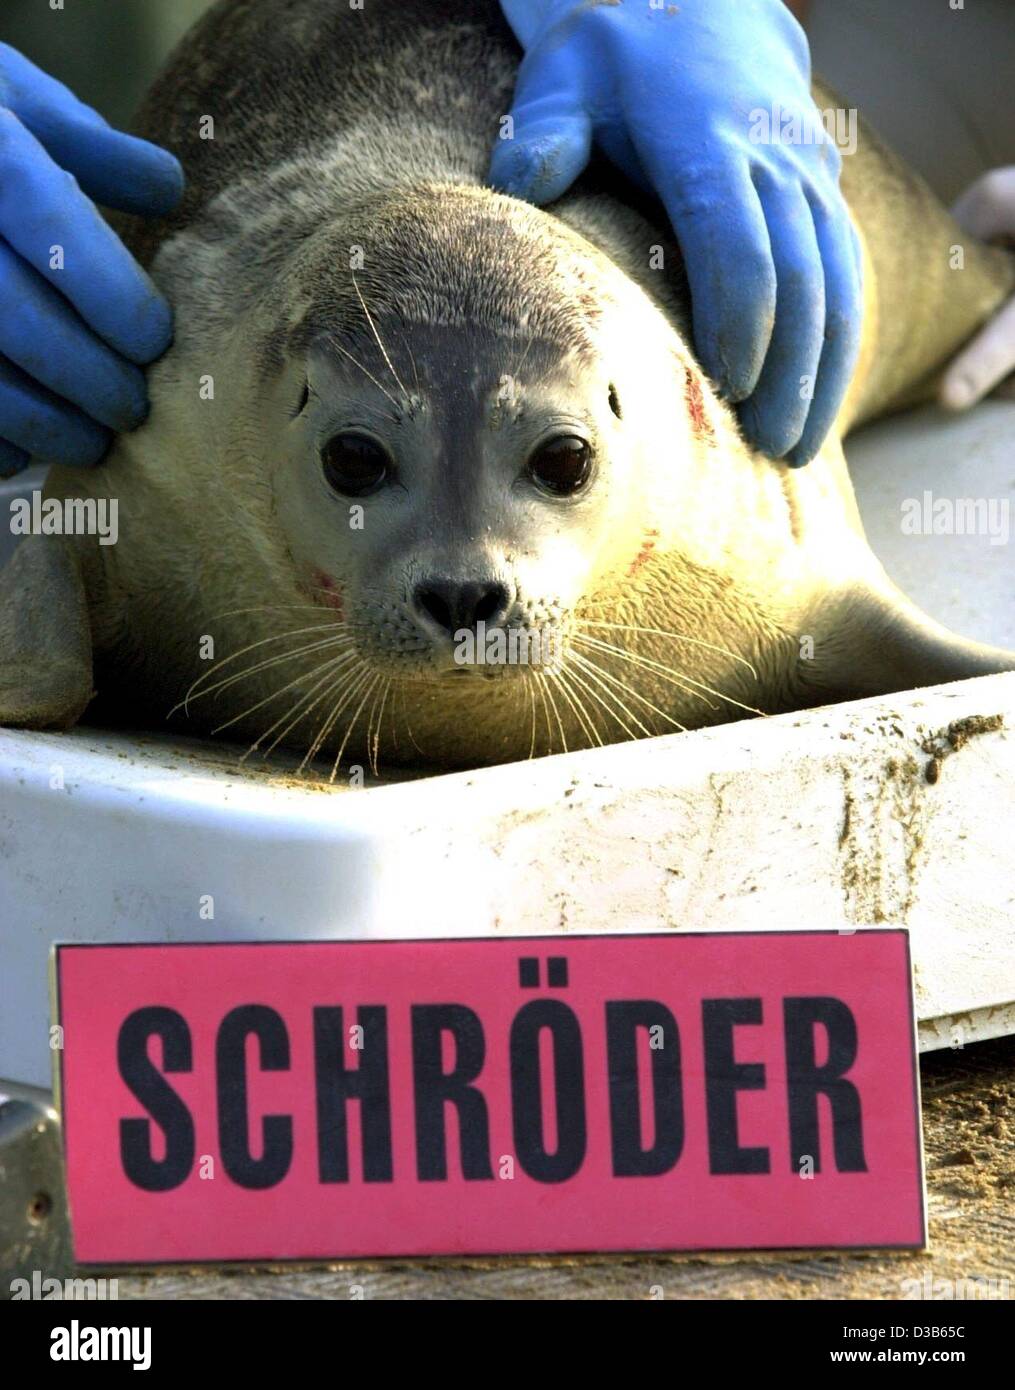 (dpa) - 'Schroeder' is the name of a 29.1 kg heavy seal living in the seal station in Friederichskoog, Germany, 6 September 2002. Named after the German Chancellor, the little seal likes to snarl at his conspecific named 'Stoiber'. Both seals are orphaned and brought up in the seal station until the Stock Photo